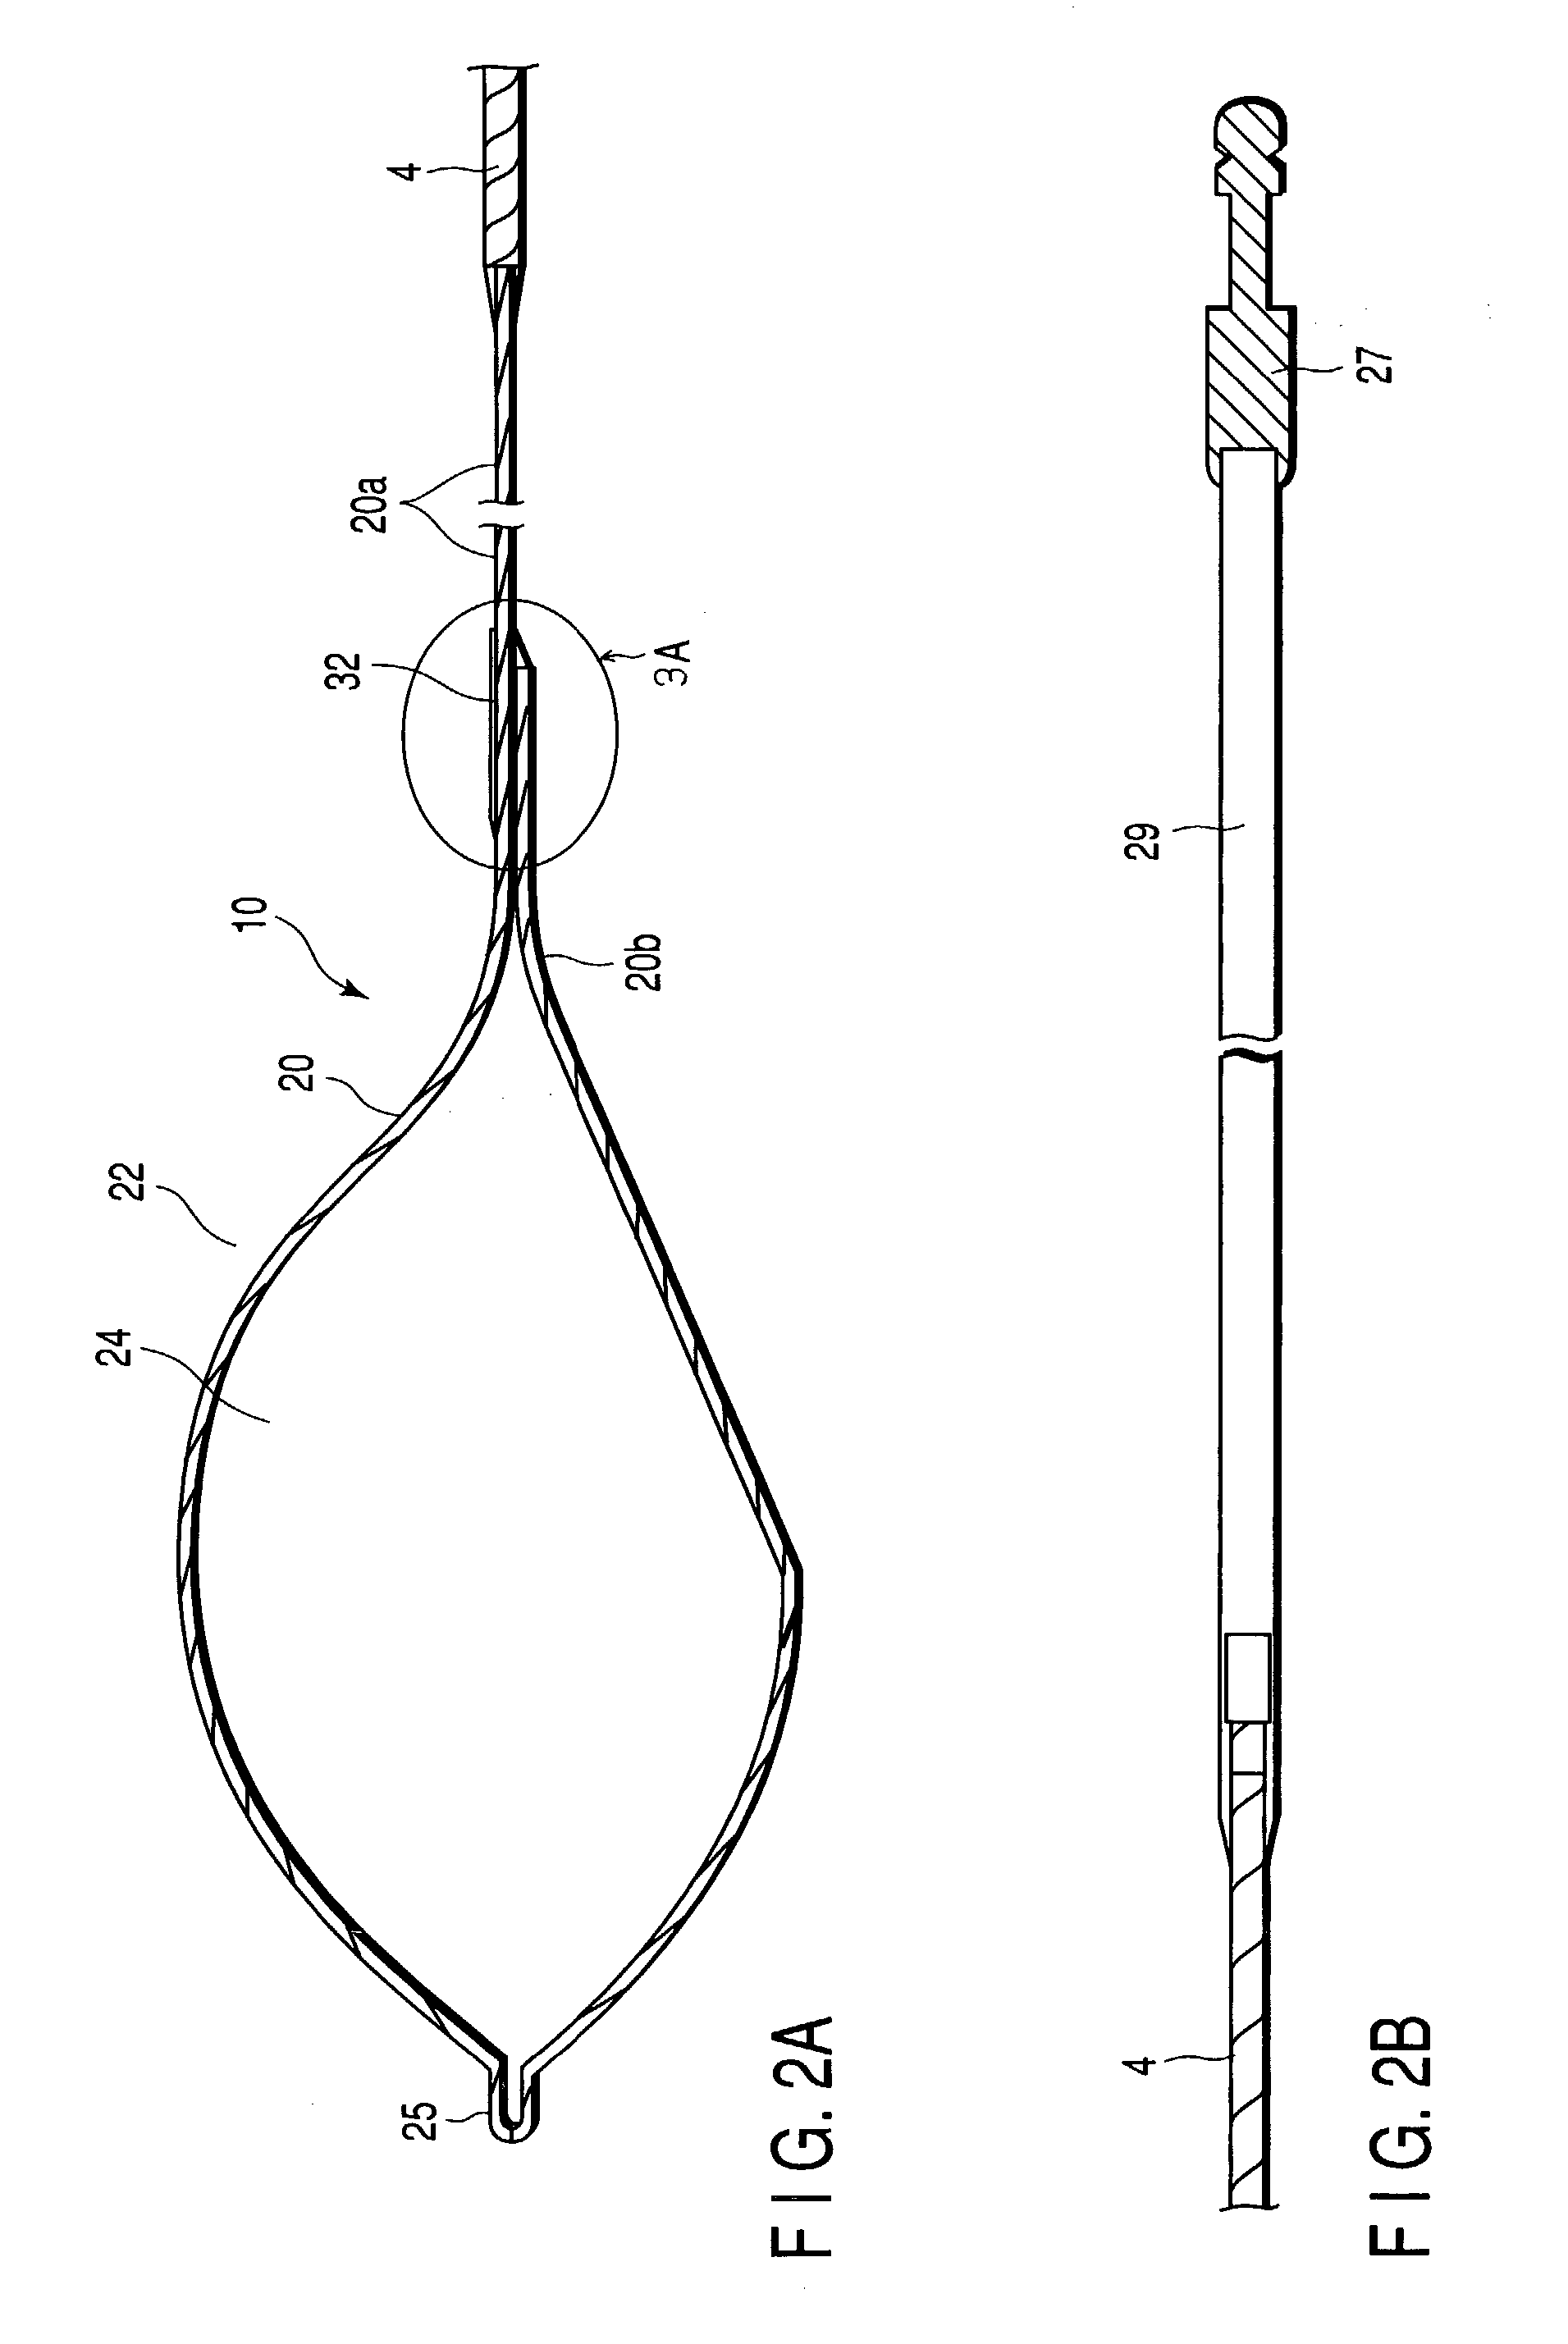 Surgical treatment device